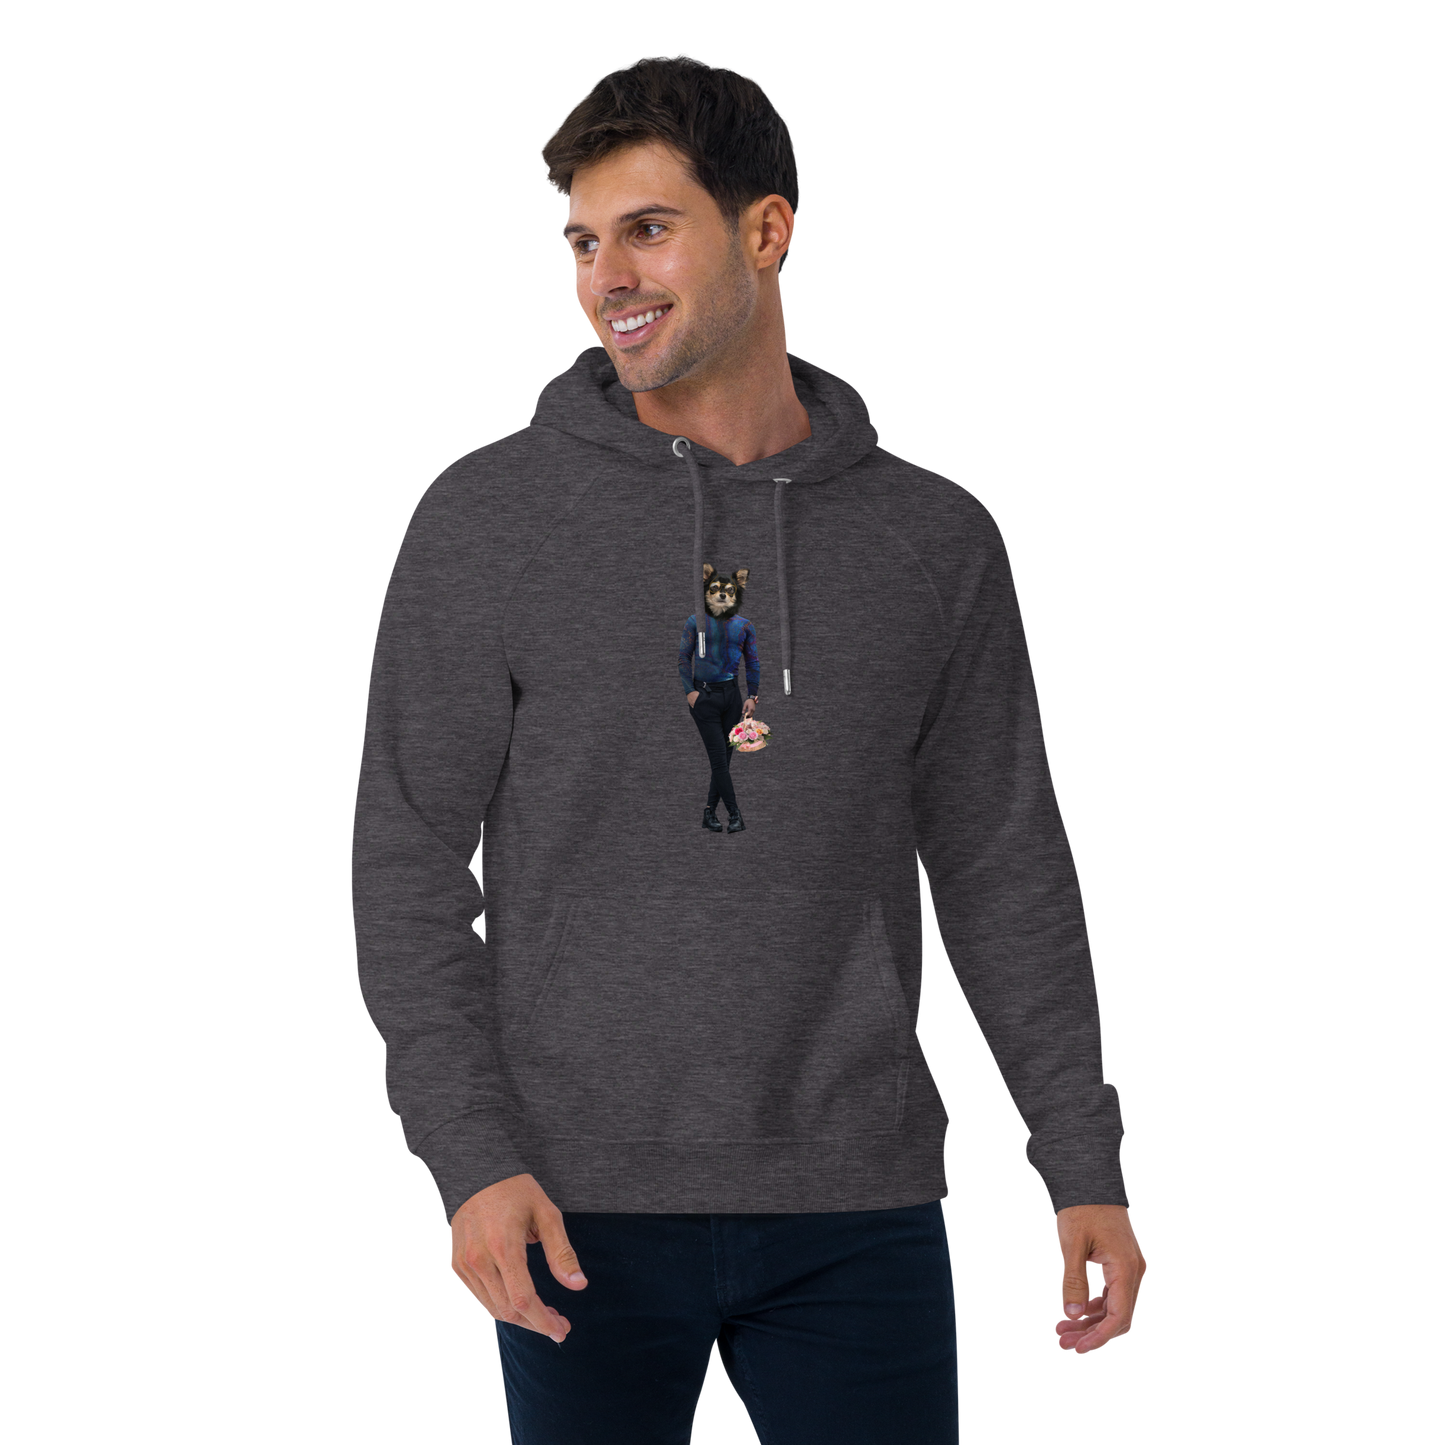 Man wearing a Charcoal Melange Anthropomorphic Dog Raglan Hoodie featuring an adorable Anthropomorphic Dog graphic on the chest - Funny Graphic Dog Hoodies - Boozy Fox